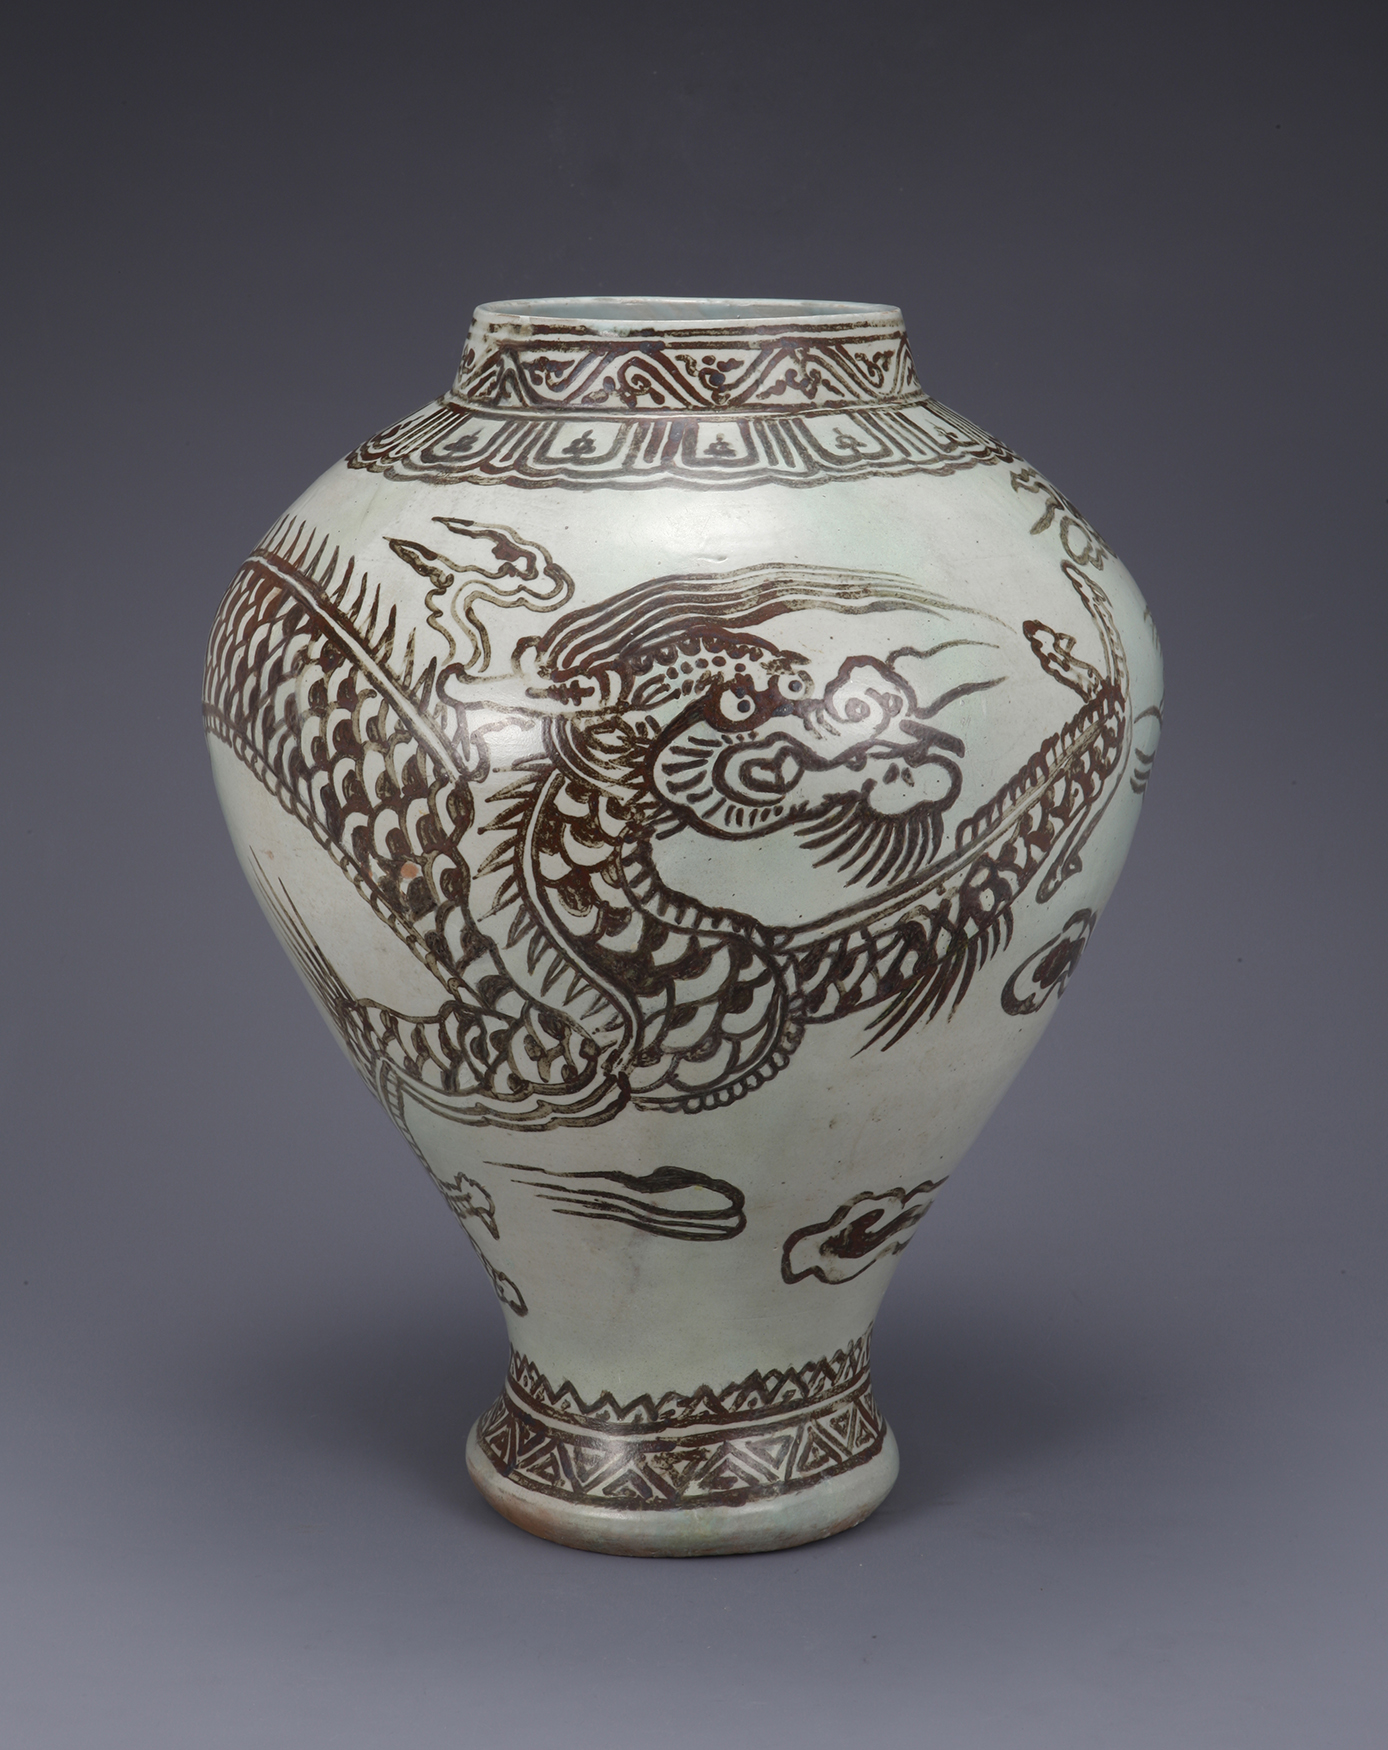 Jar with Cloud and Dragon Design in Underglaze Iron